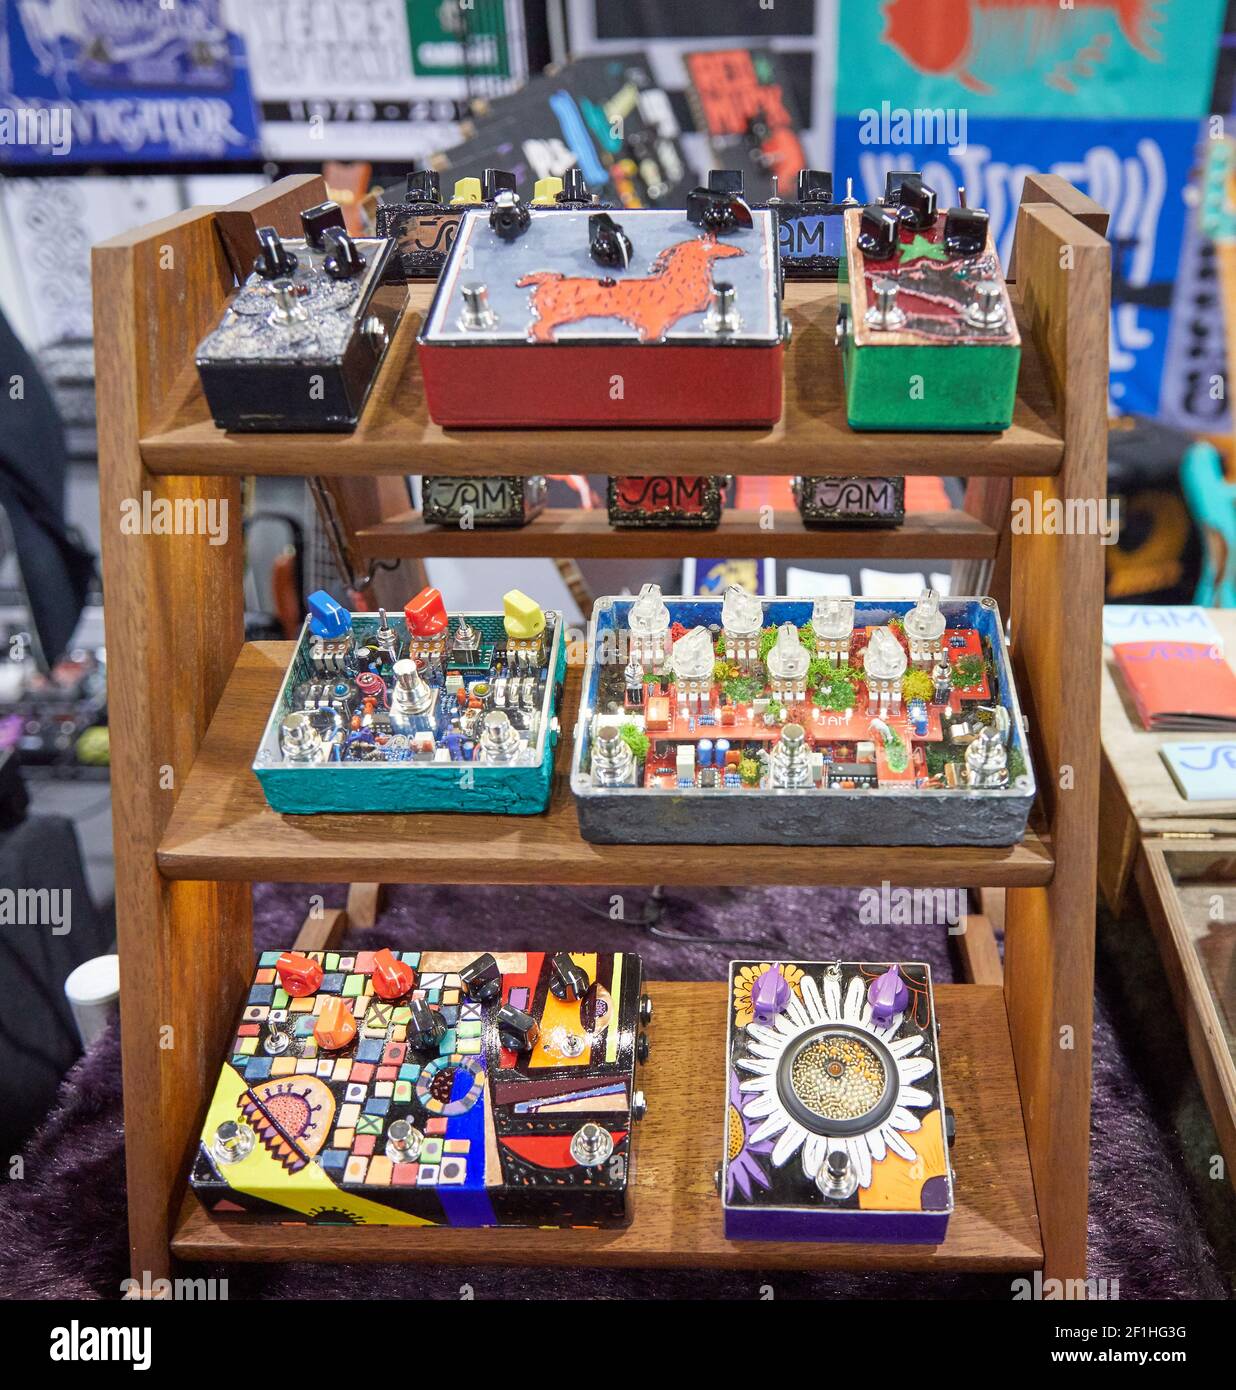 JAM pedals Guitar Pedal Display at Musical Instrument Convention Stock Photo